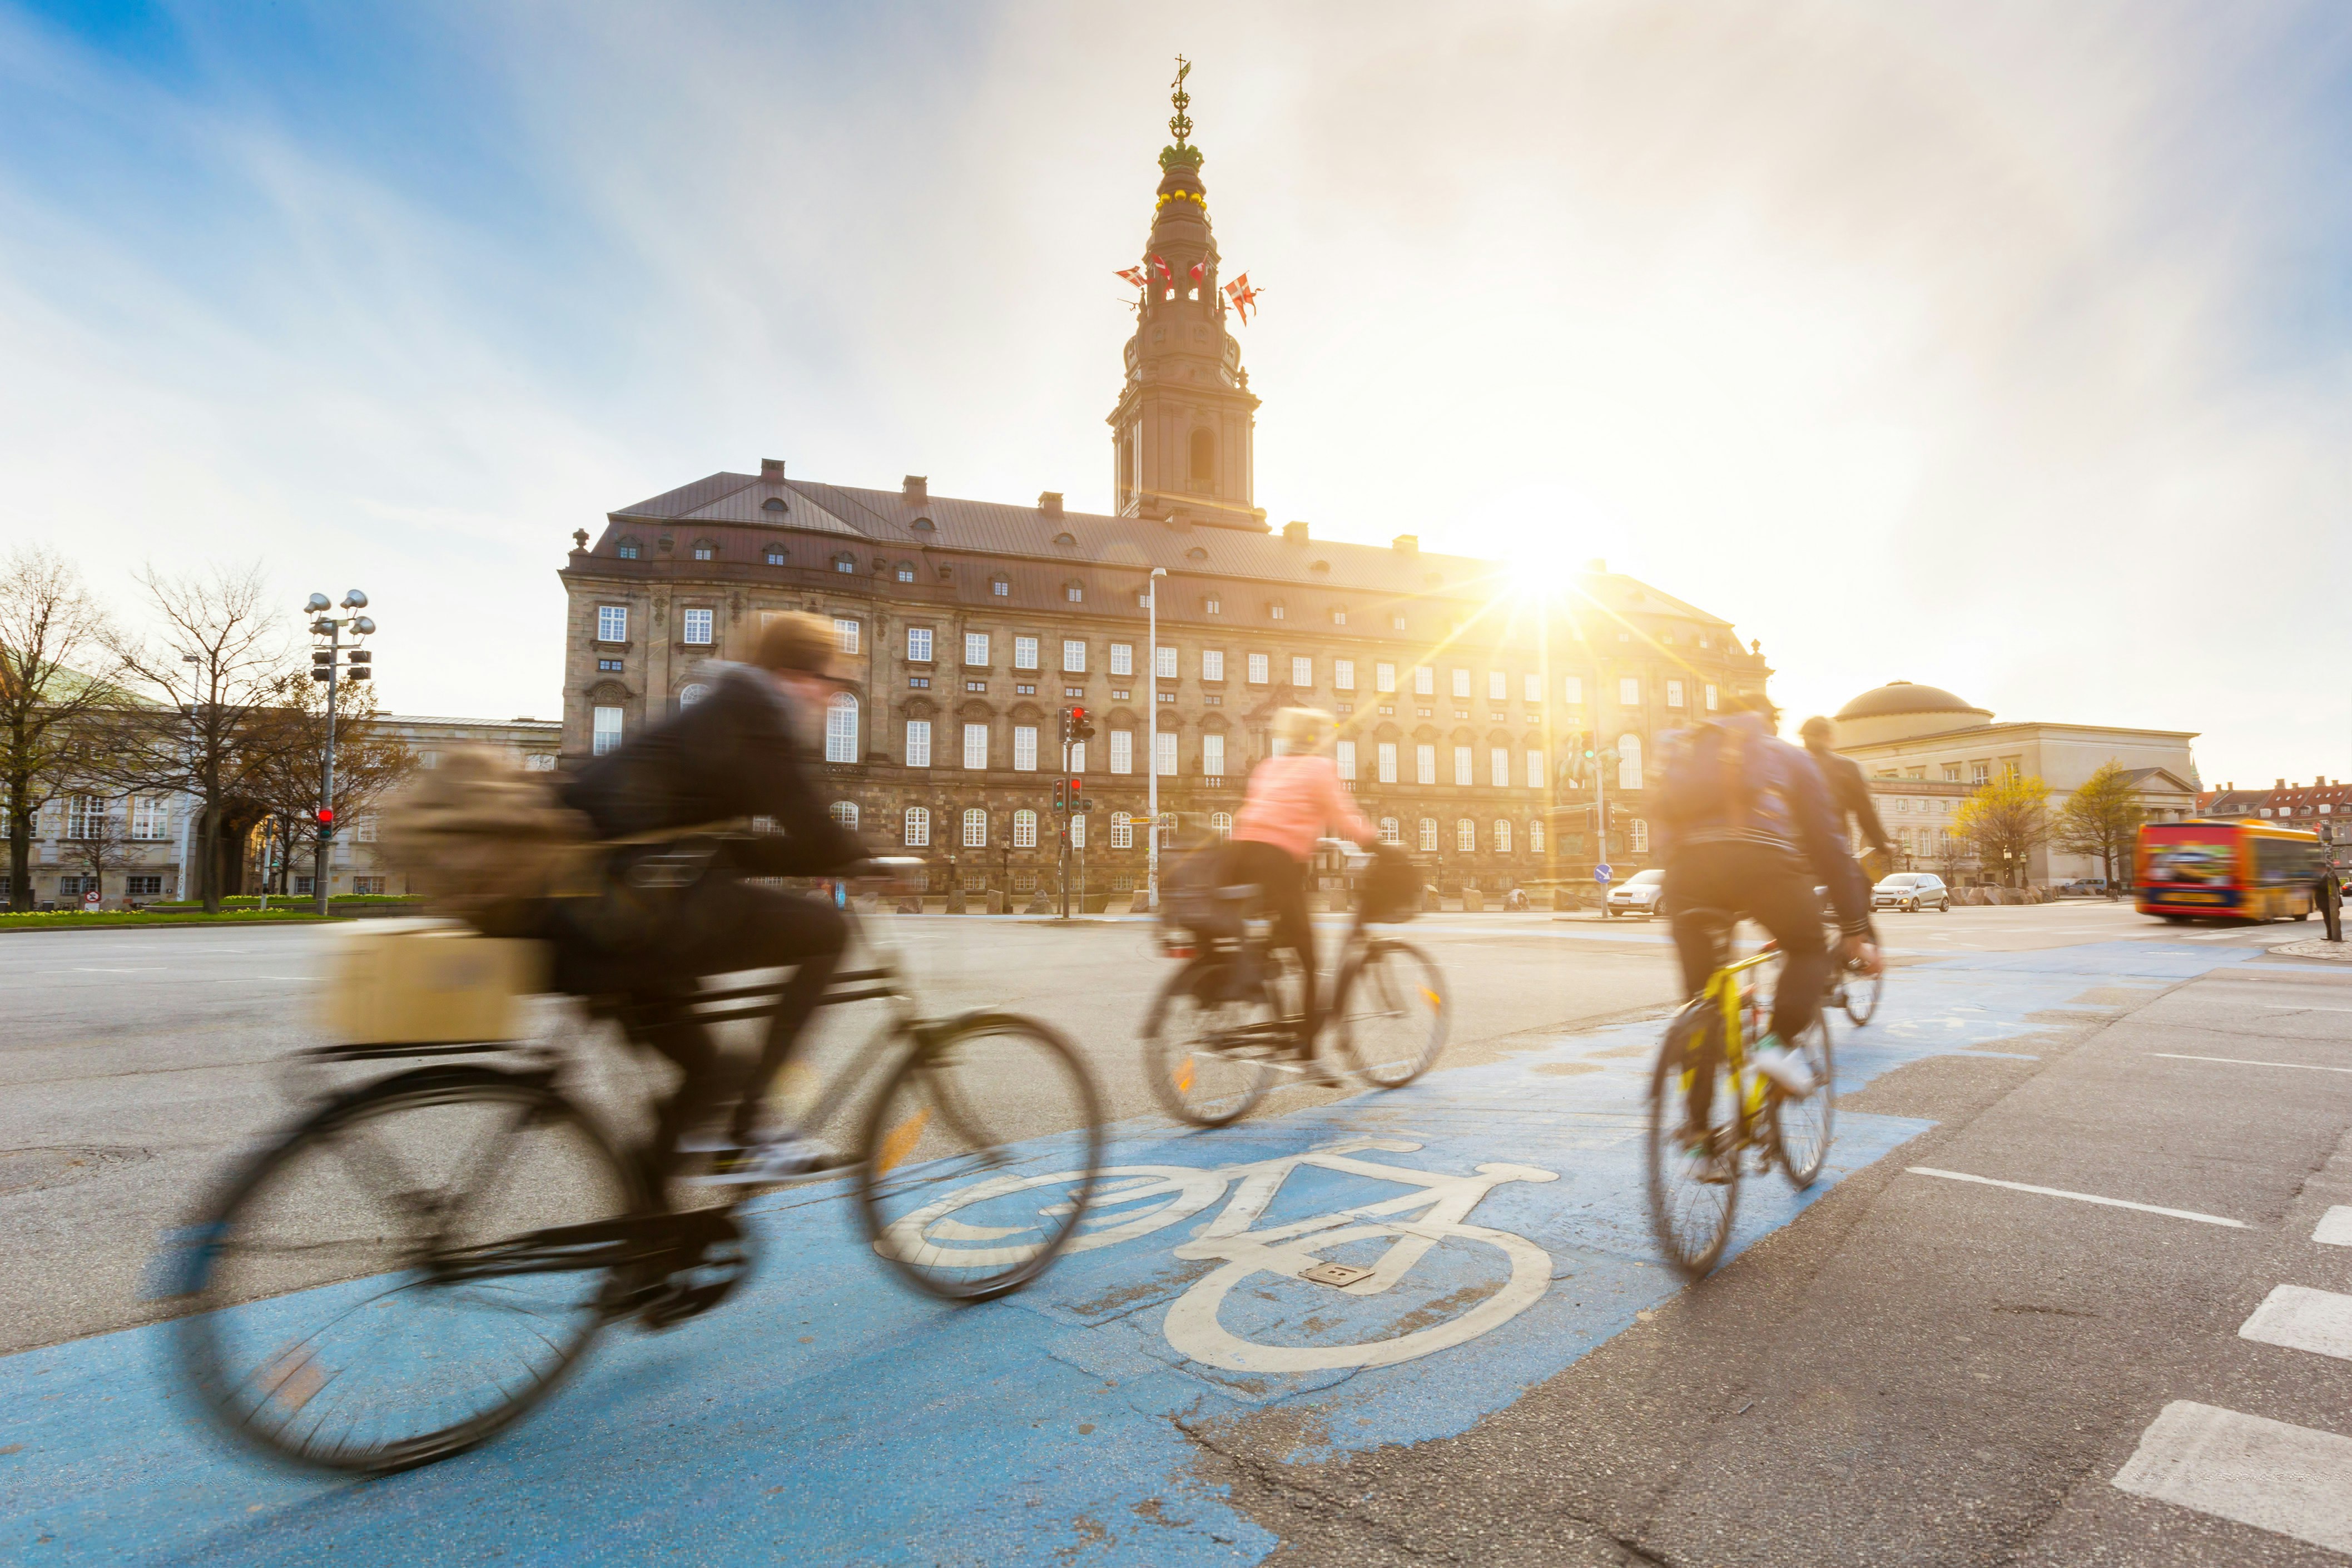 Cyclists are a-blur as they pedal on a blue cycle lane in front of Christiansborg Palace in Copenhagen